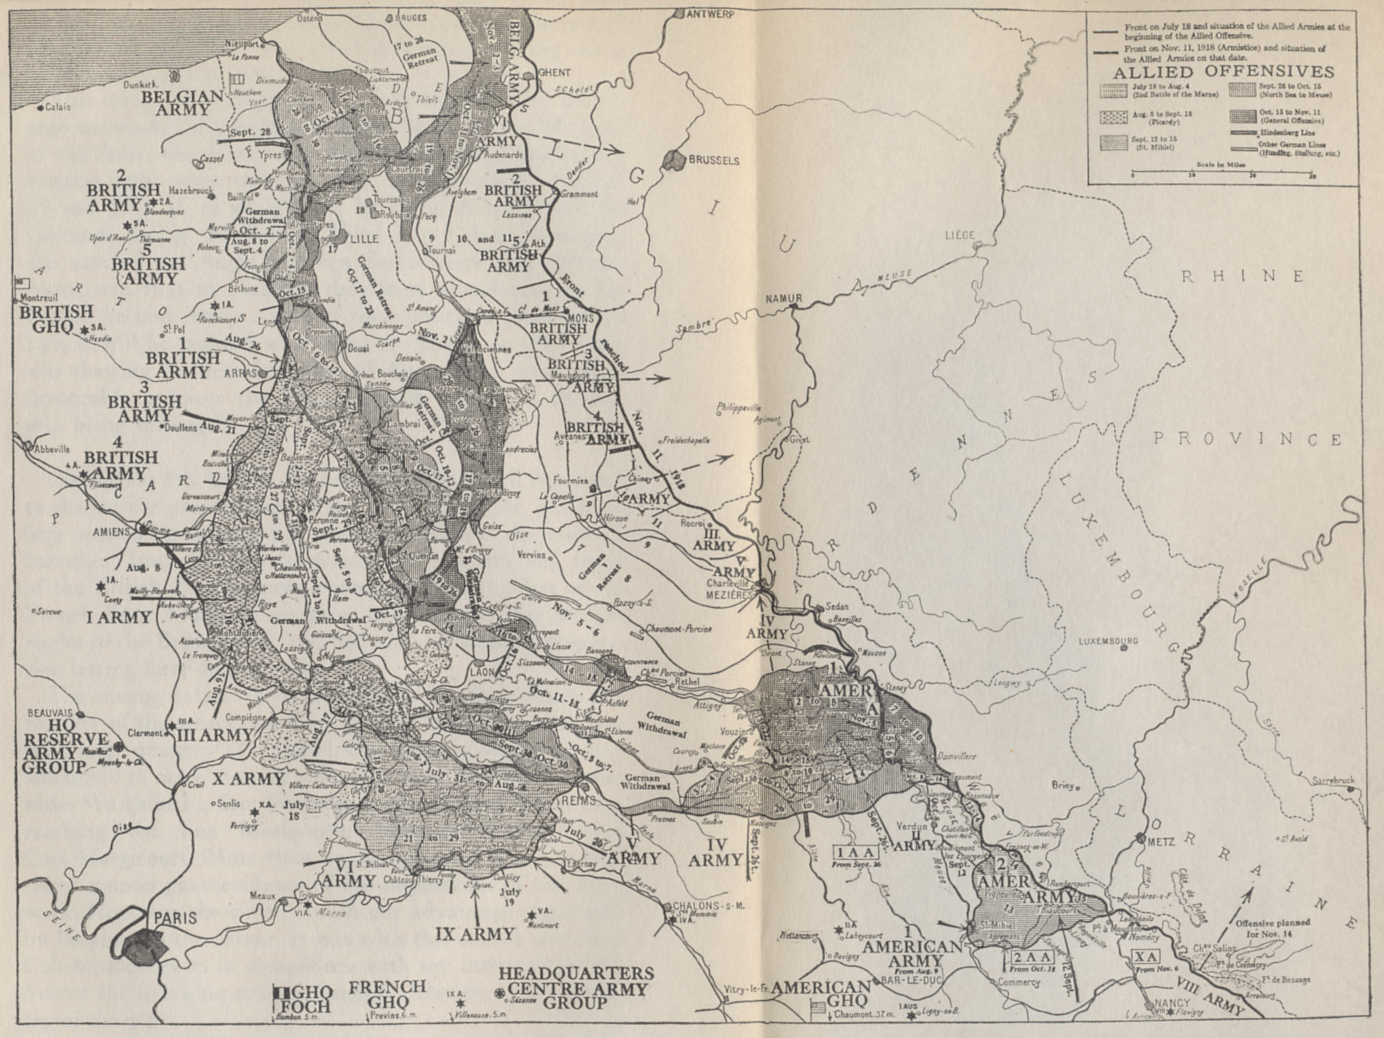 Map of the Allied offensives of 1918, from July 18 and the Second Battle of the Marne to the Armistice on November 11. From 'The Memoirs of Marshall Foch' by Marshall Foch.